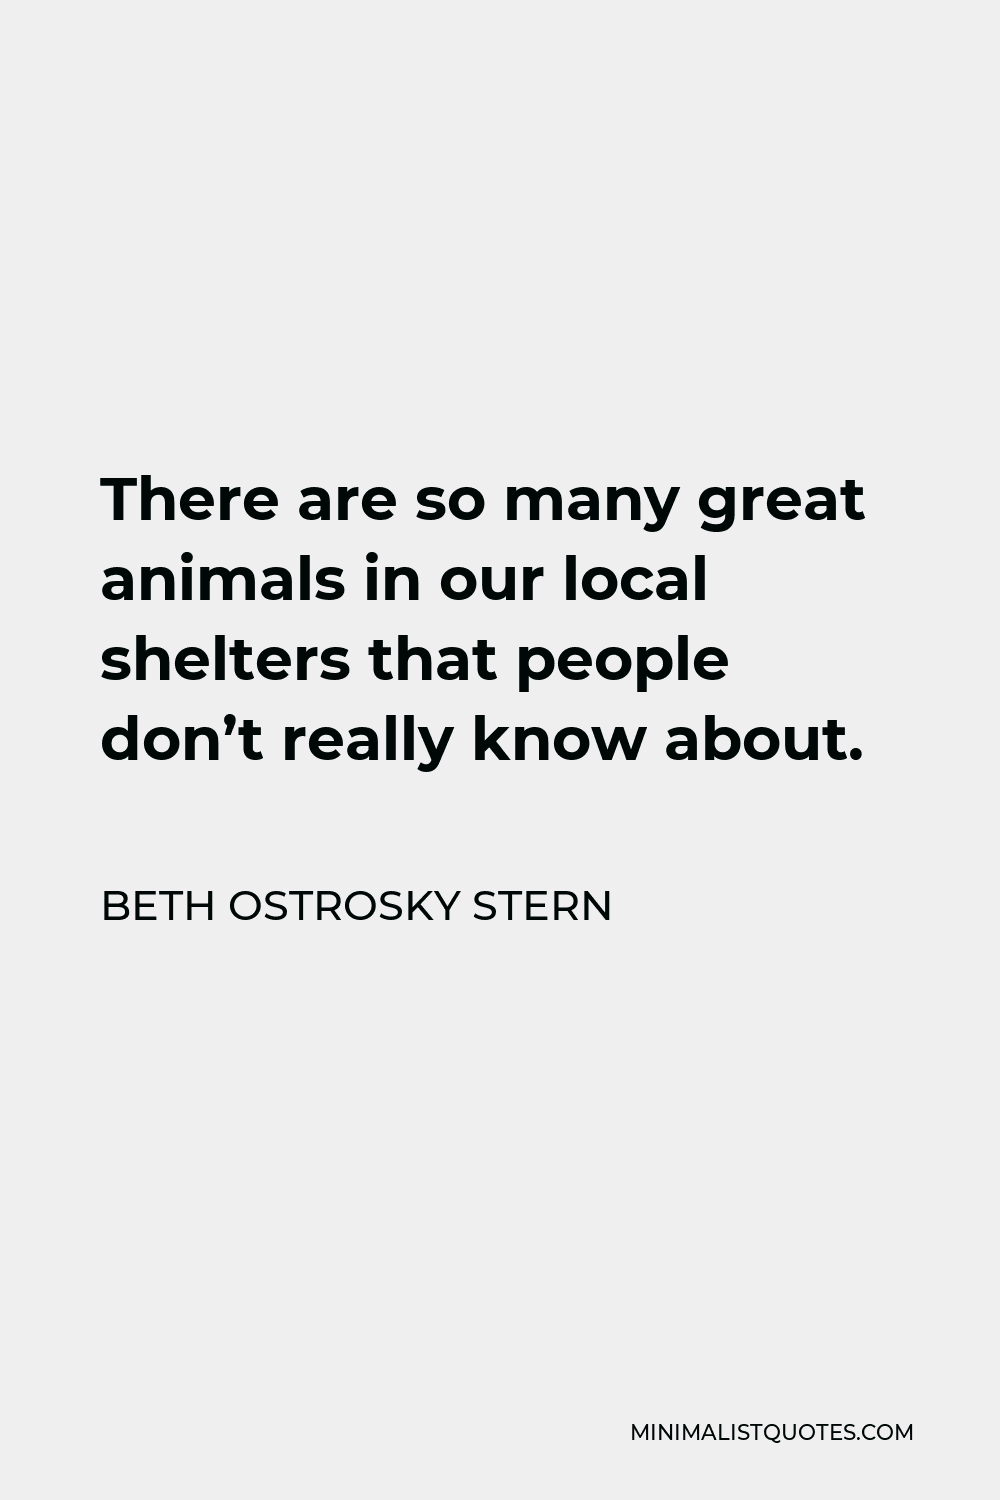 Beth Ostrosky Stern Quote - There are so many great animals in our local shelters that people don’t really know about.